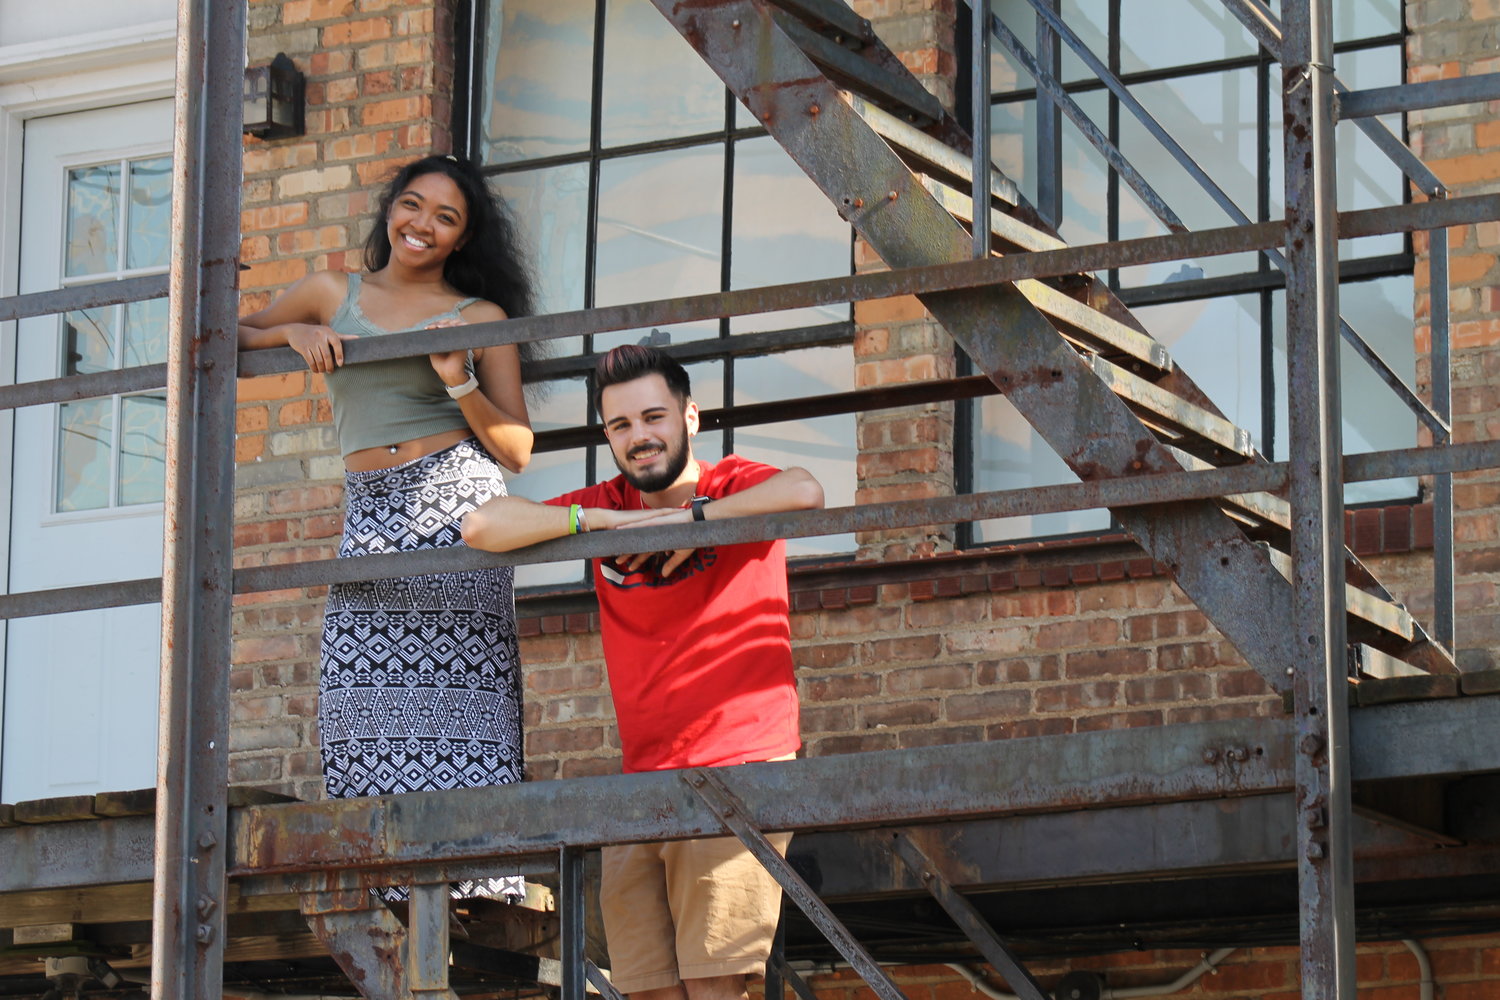 Tianna Leon, who portrays Anita in “West Side Story,” and Carlos Lenz, who plays one of the Shark gang members, on the fire escape where the show will be performed outdoors at 310 S. Grand Ave. It’s located across from the Michigan Department of Health and Human Services.